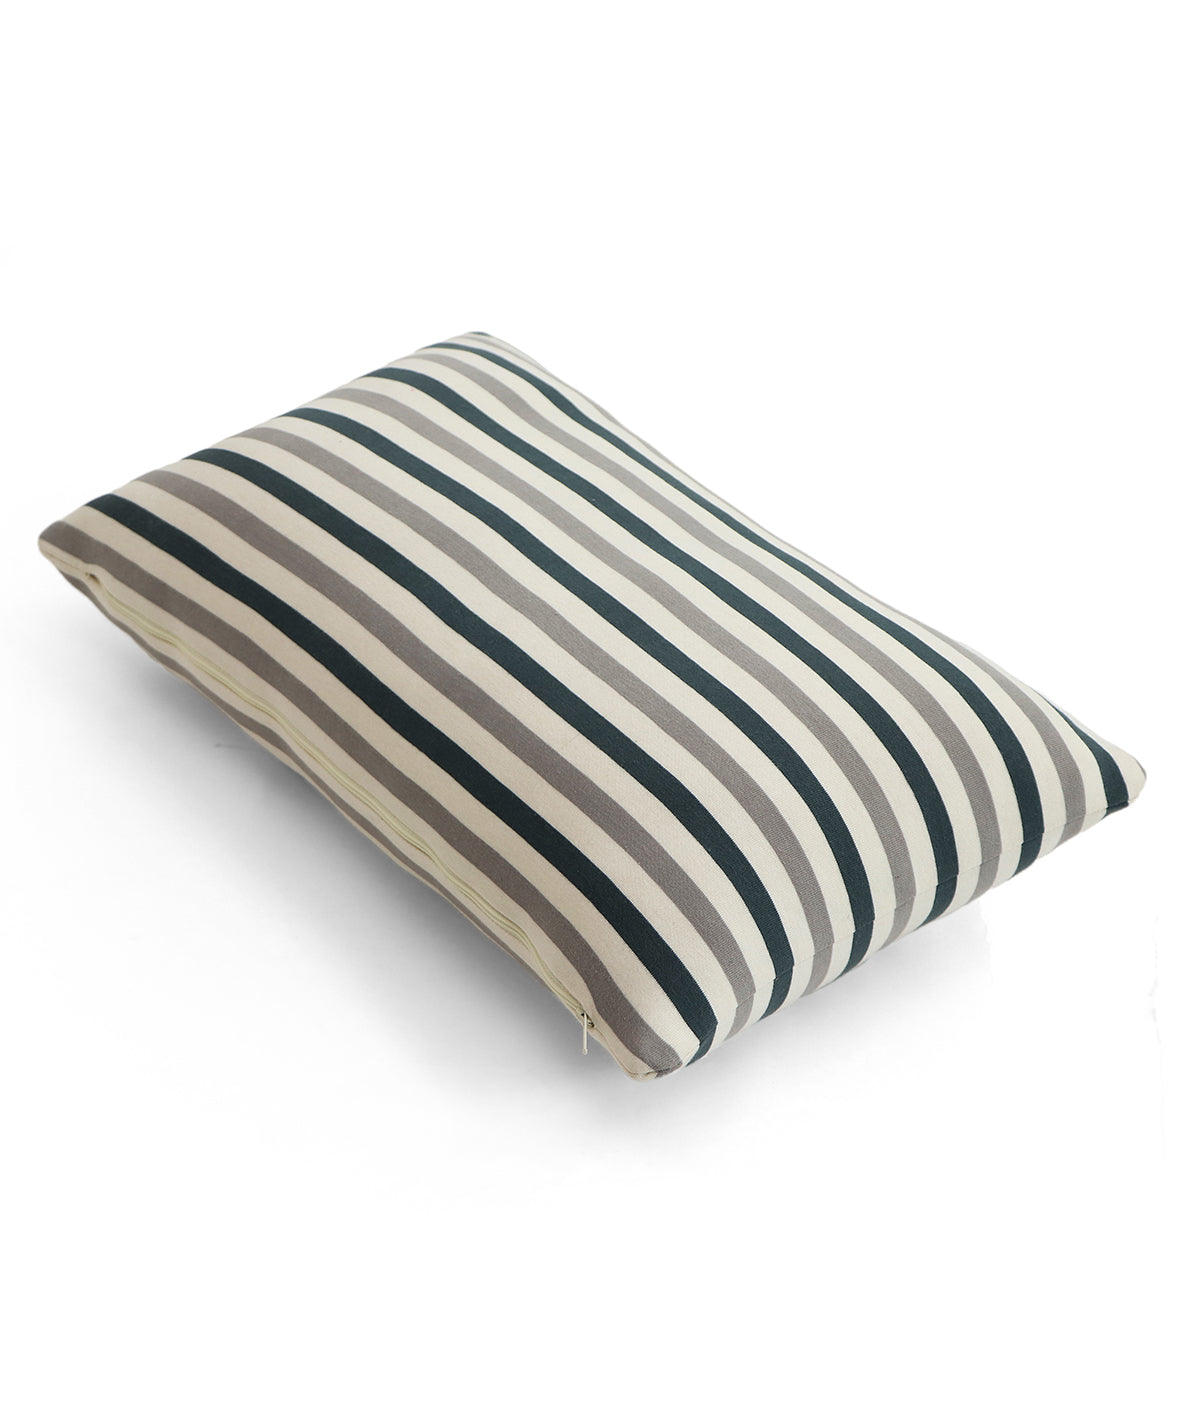 Candy Stripes Cotton Knitted Decorative Champion Blue, Natural & Light Grey Color 12 x 20 Inches Pillow Cover